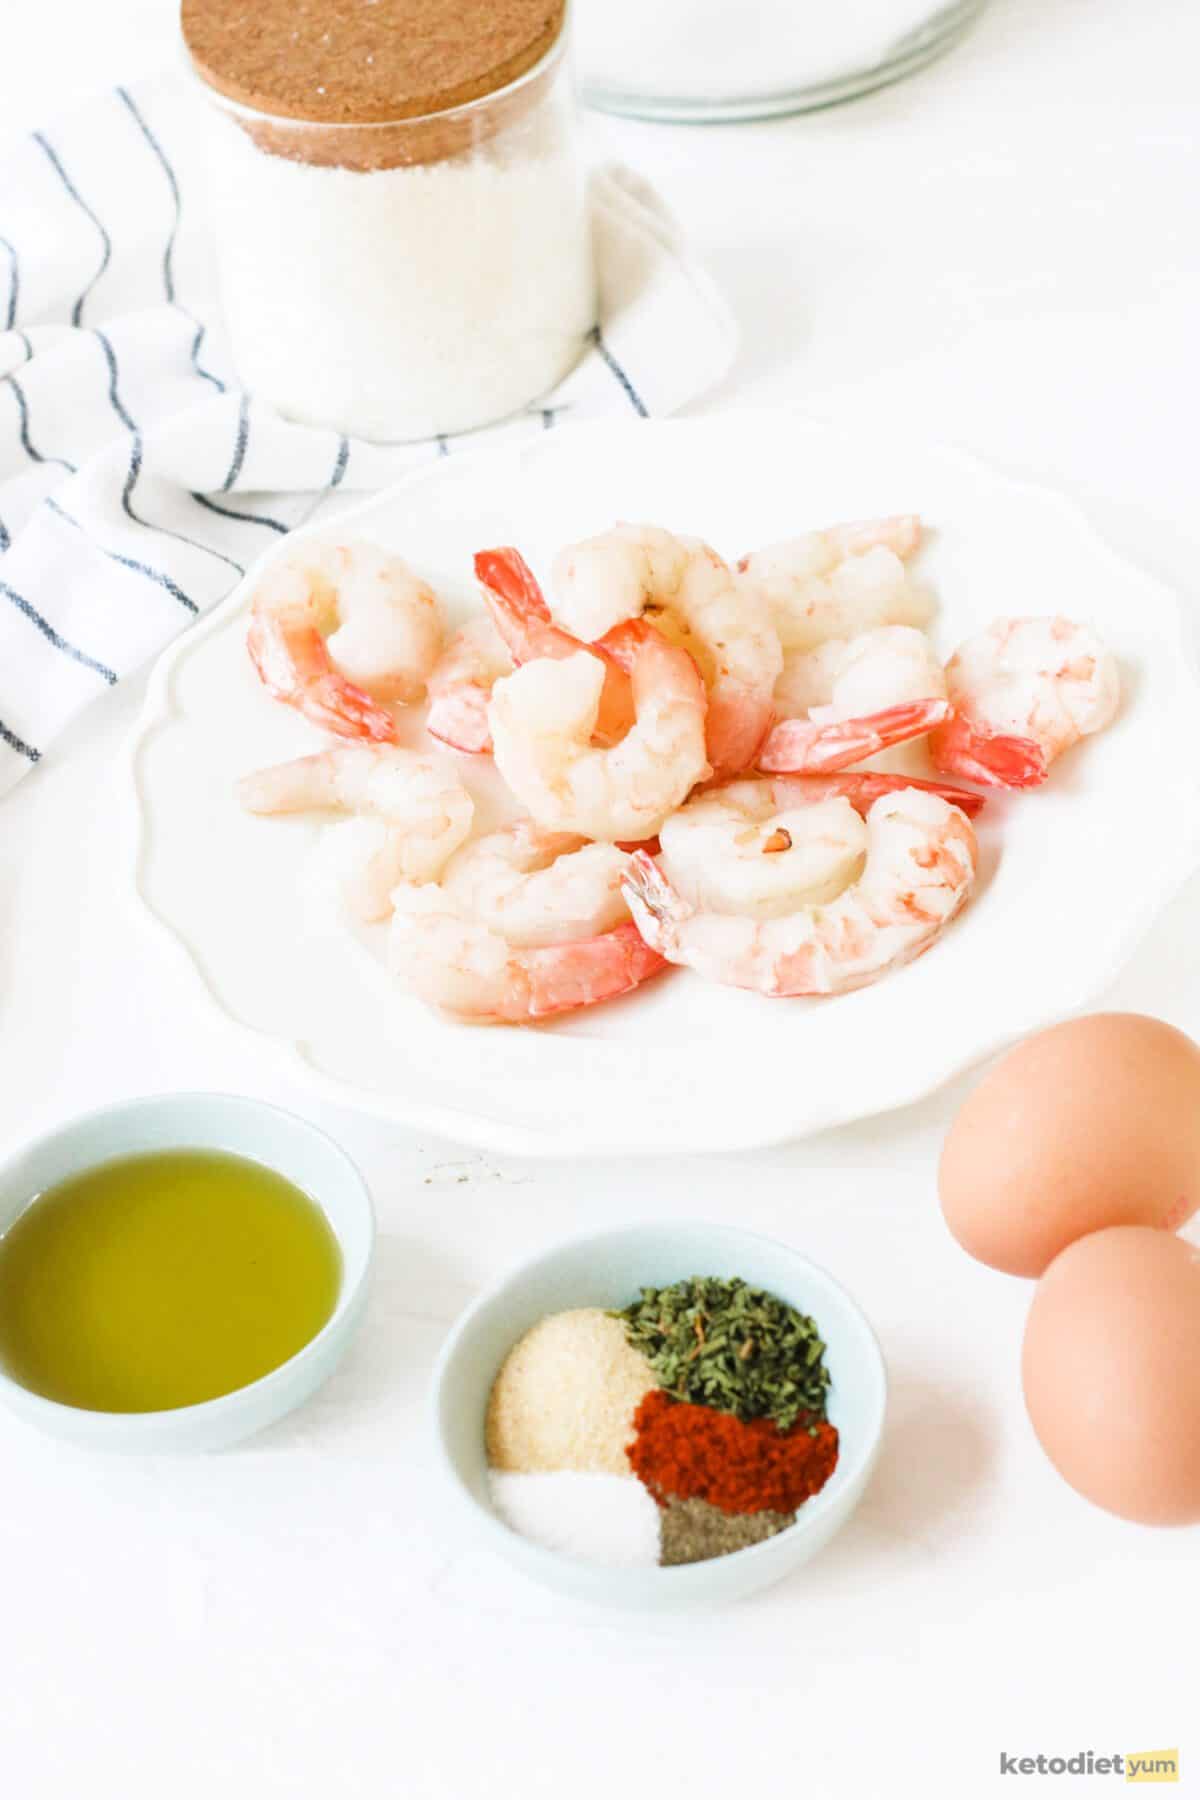 Ingredients arranged on a table including shrimp, eggs, avocado oil, shredded coconut and seasonings